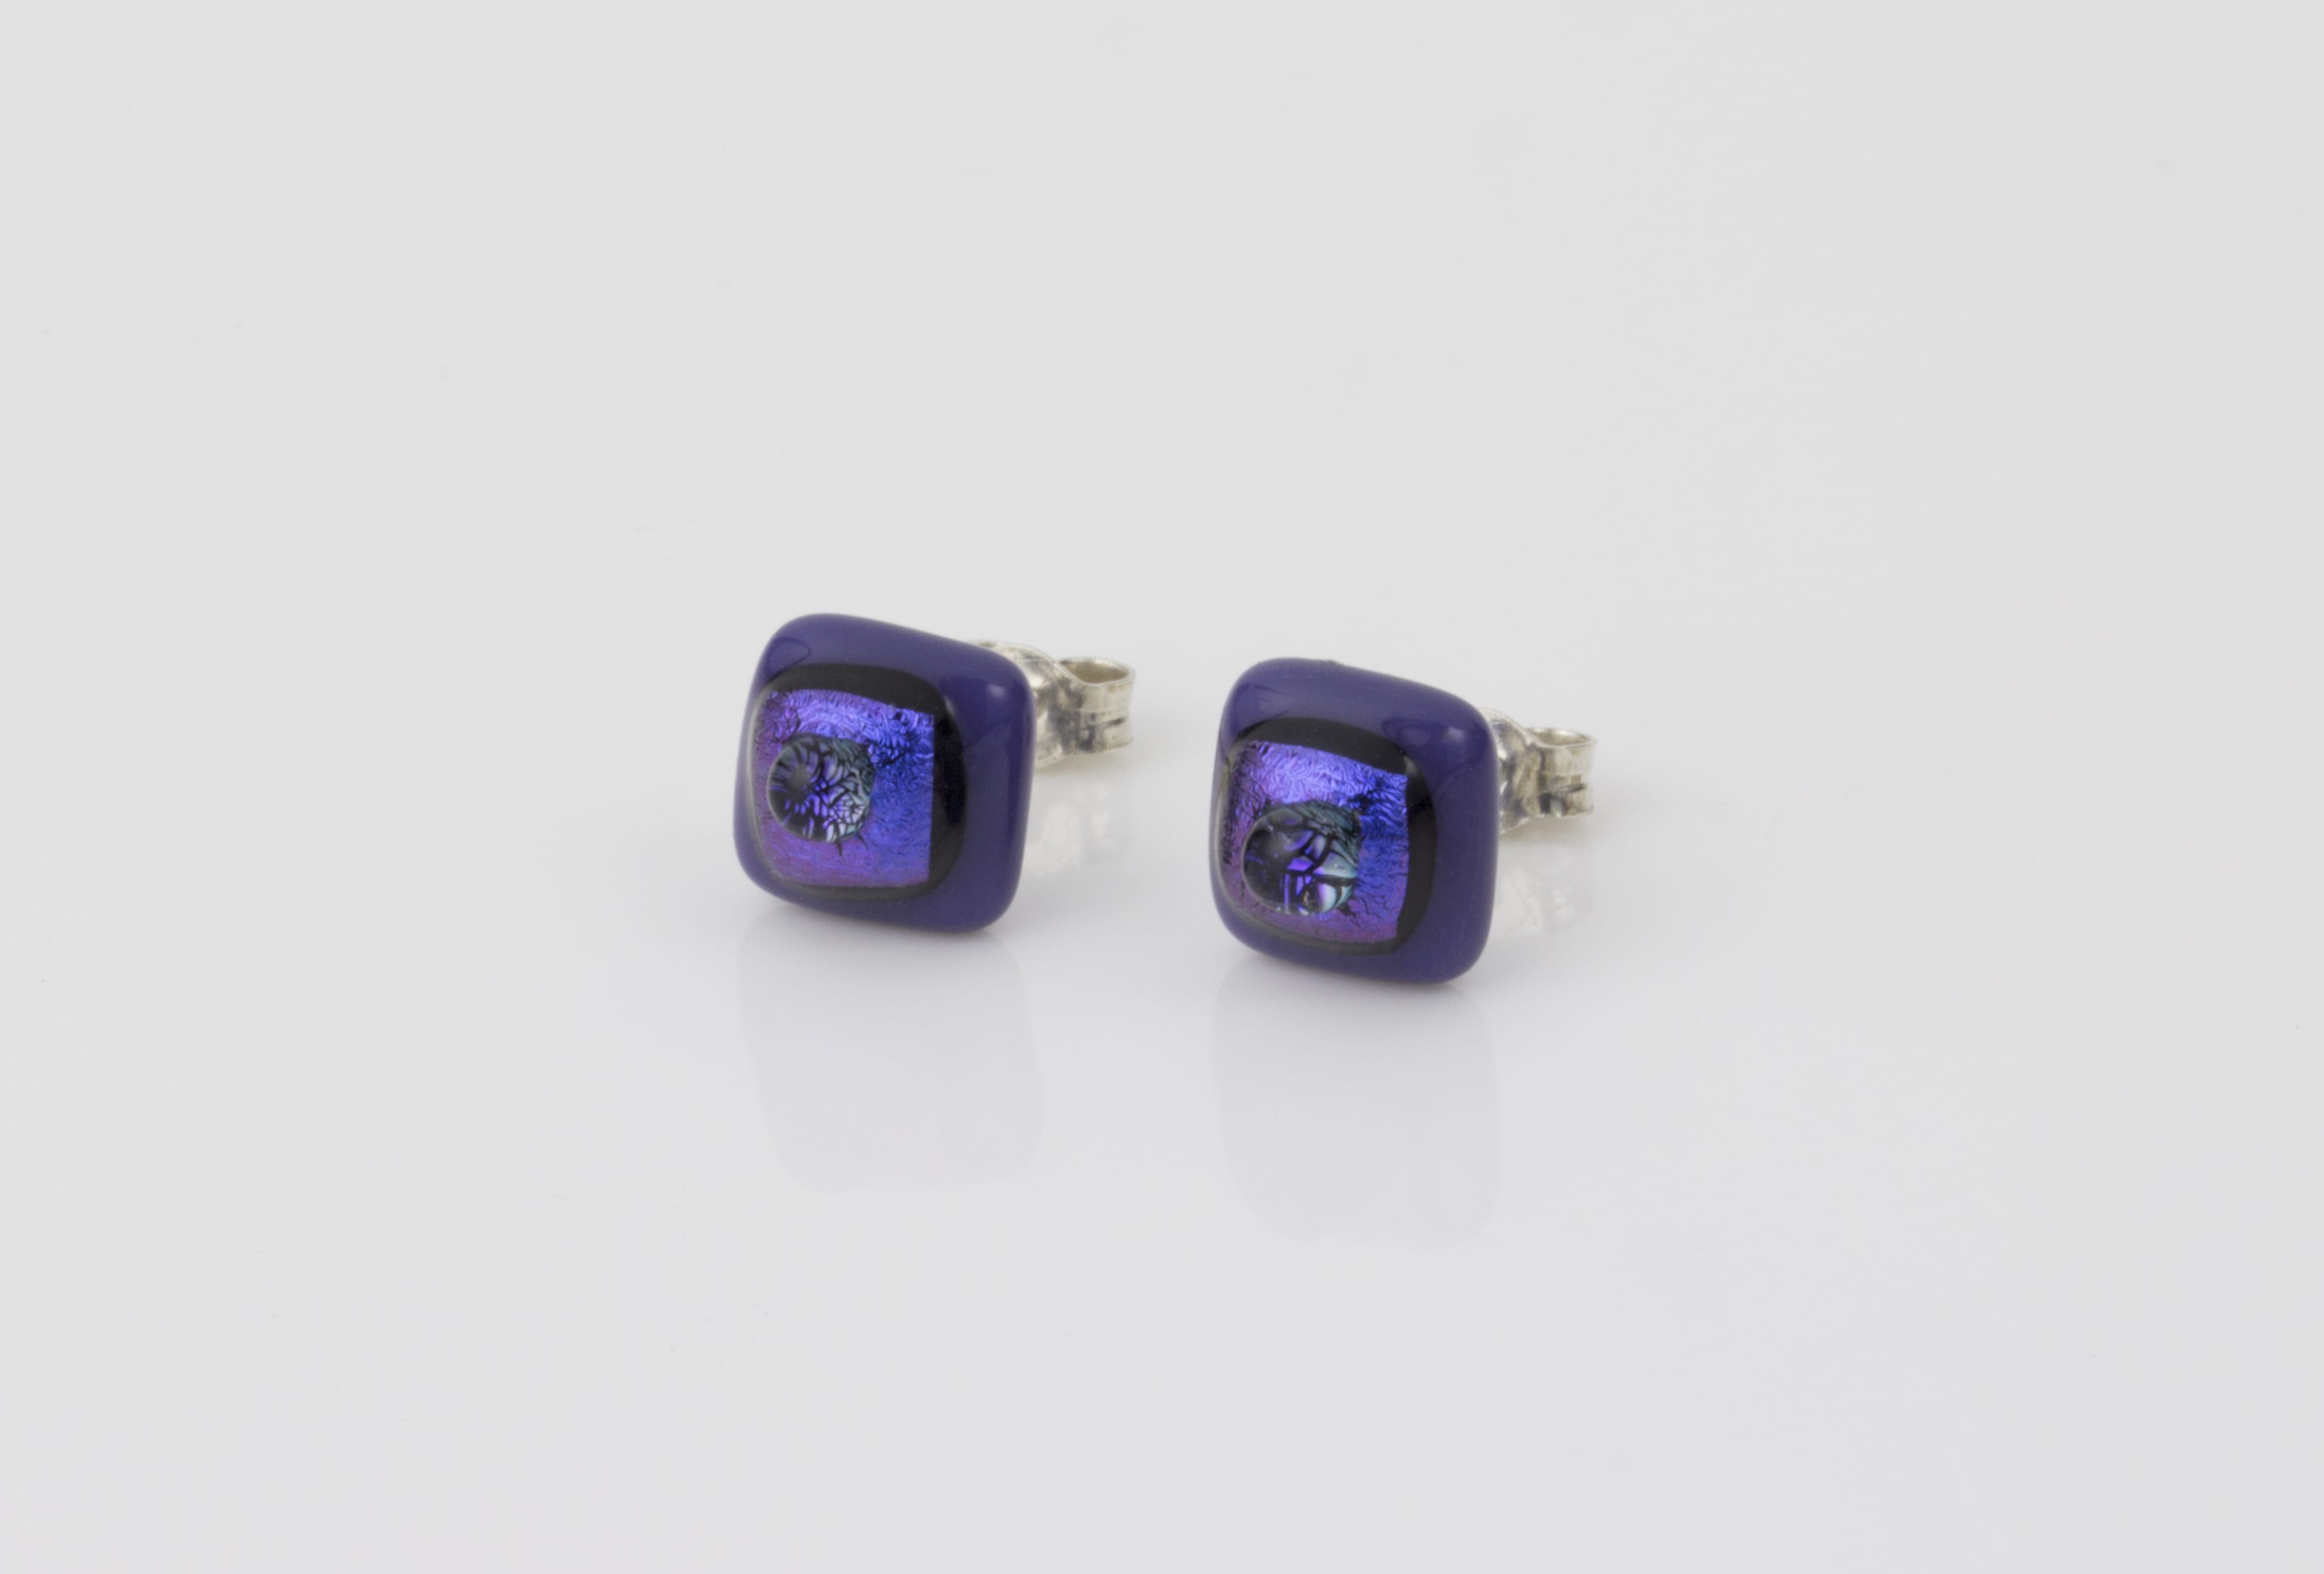 Dichroic glass jewellery uk, handmade stud earrings - purple opal/dichroic/clear glass stack. 10mm square, sterling silver